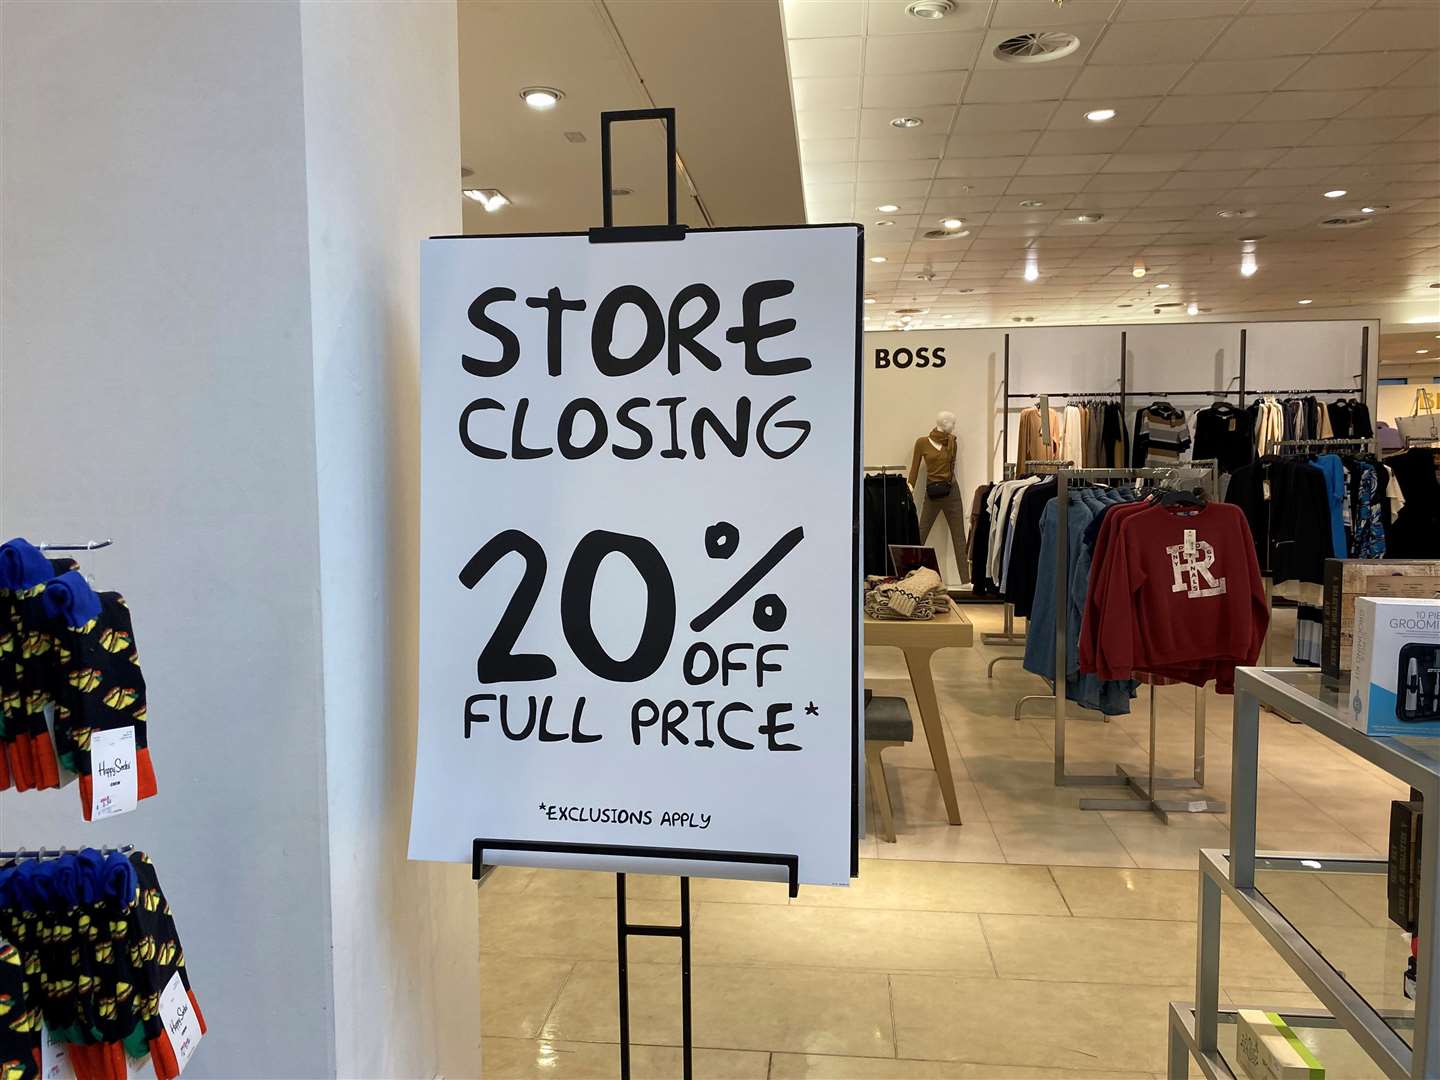 House of Fraser is closing down for a refit